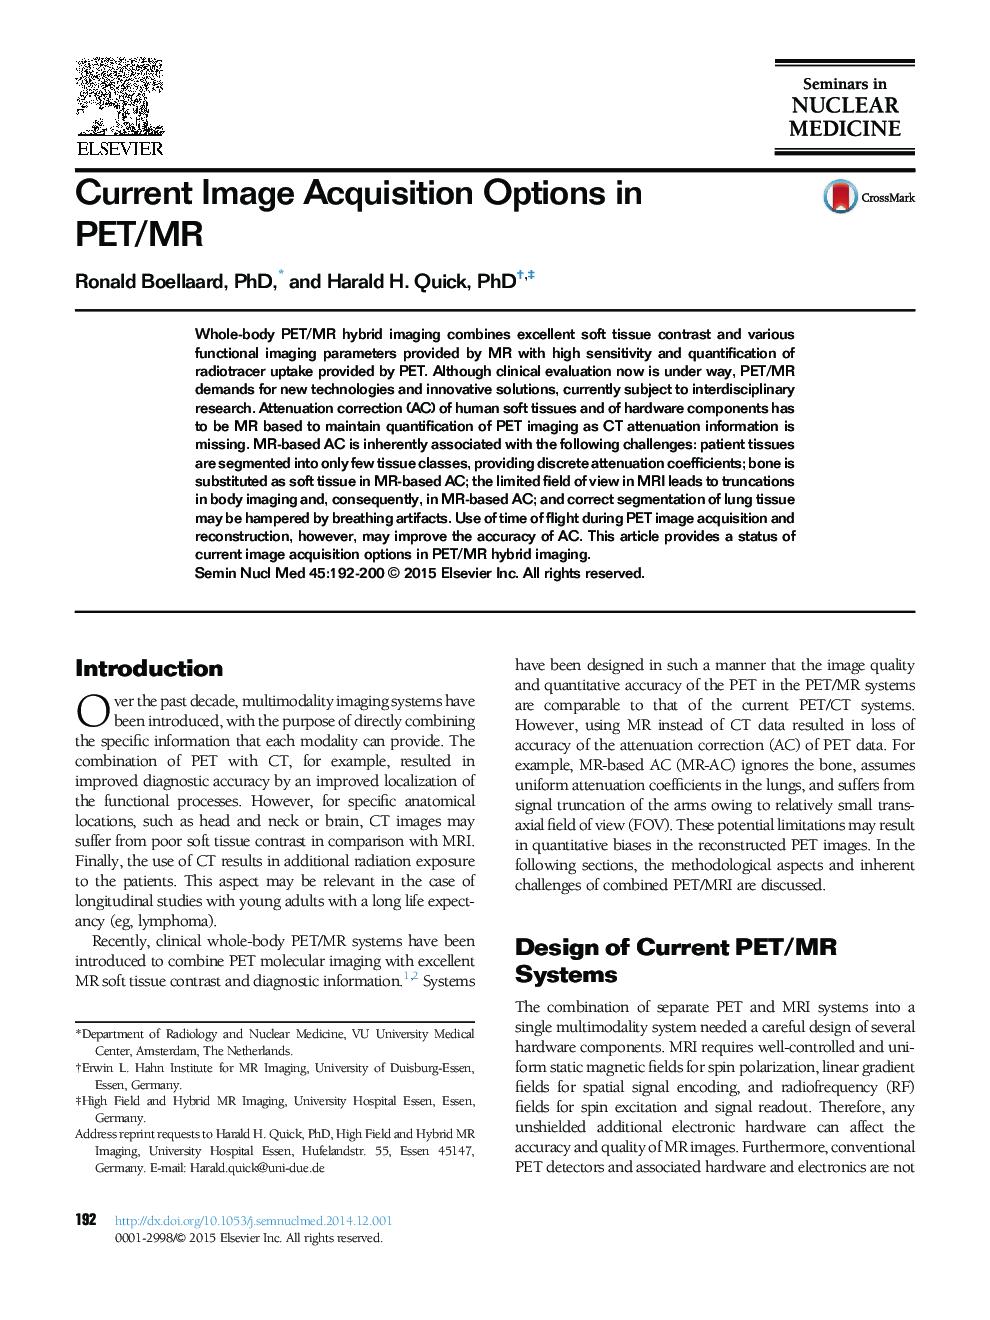 Current Image Acquisition Options in PET/MR